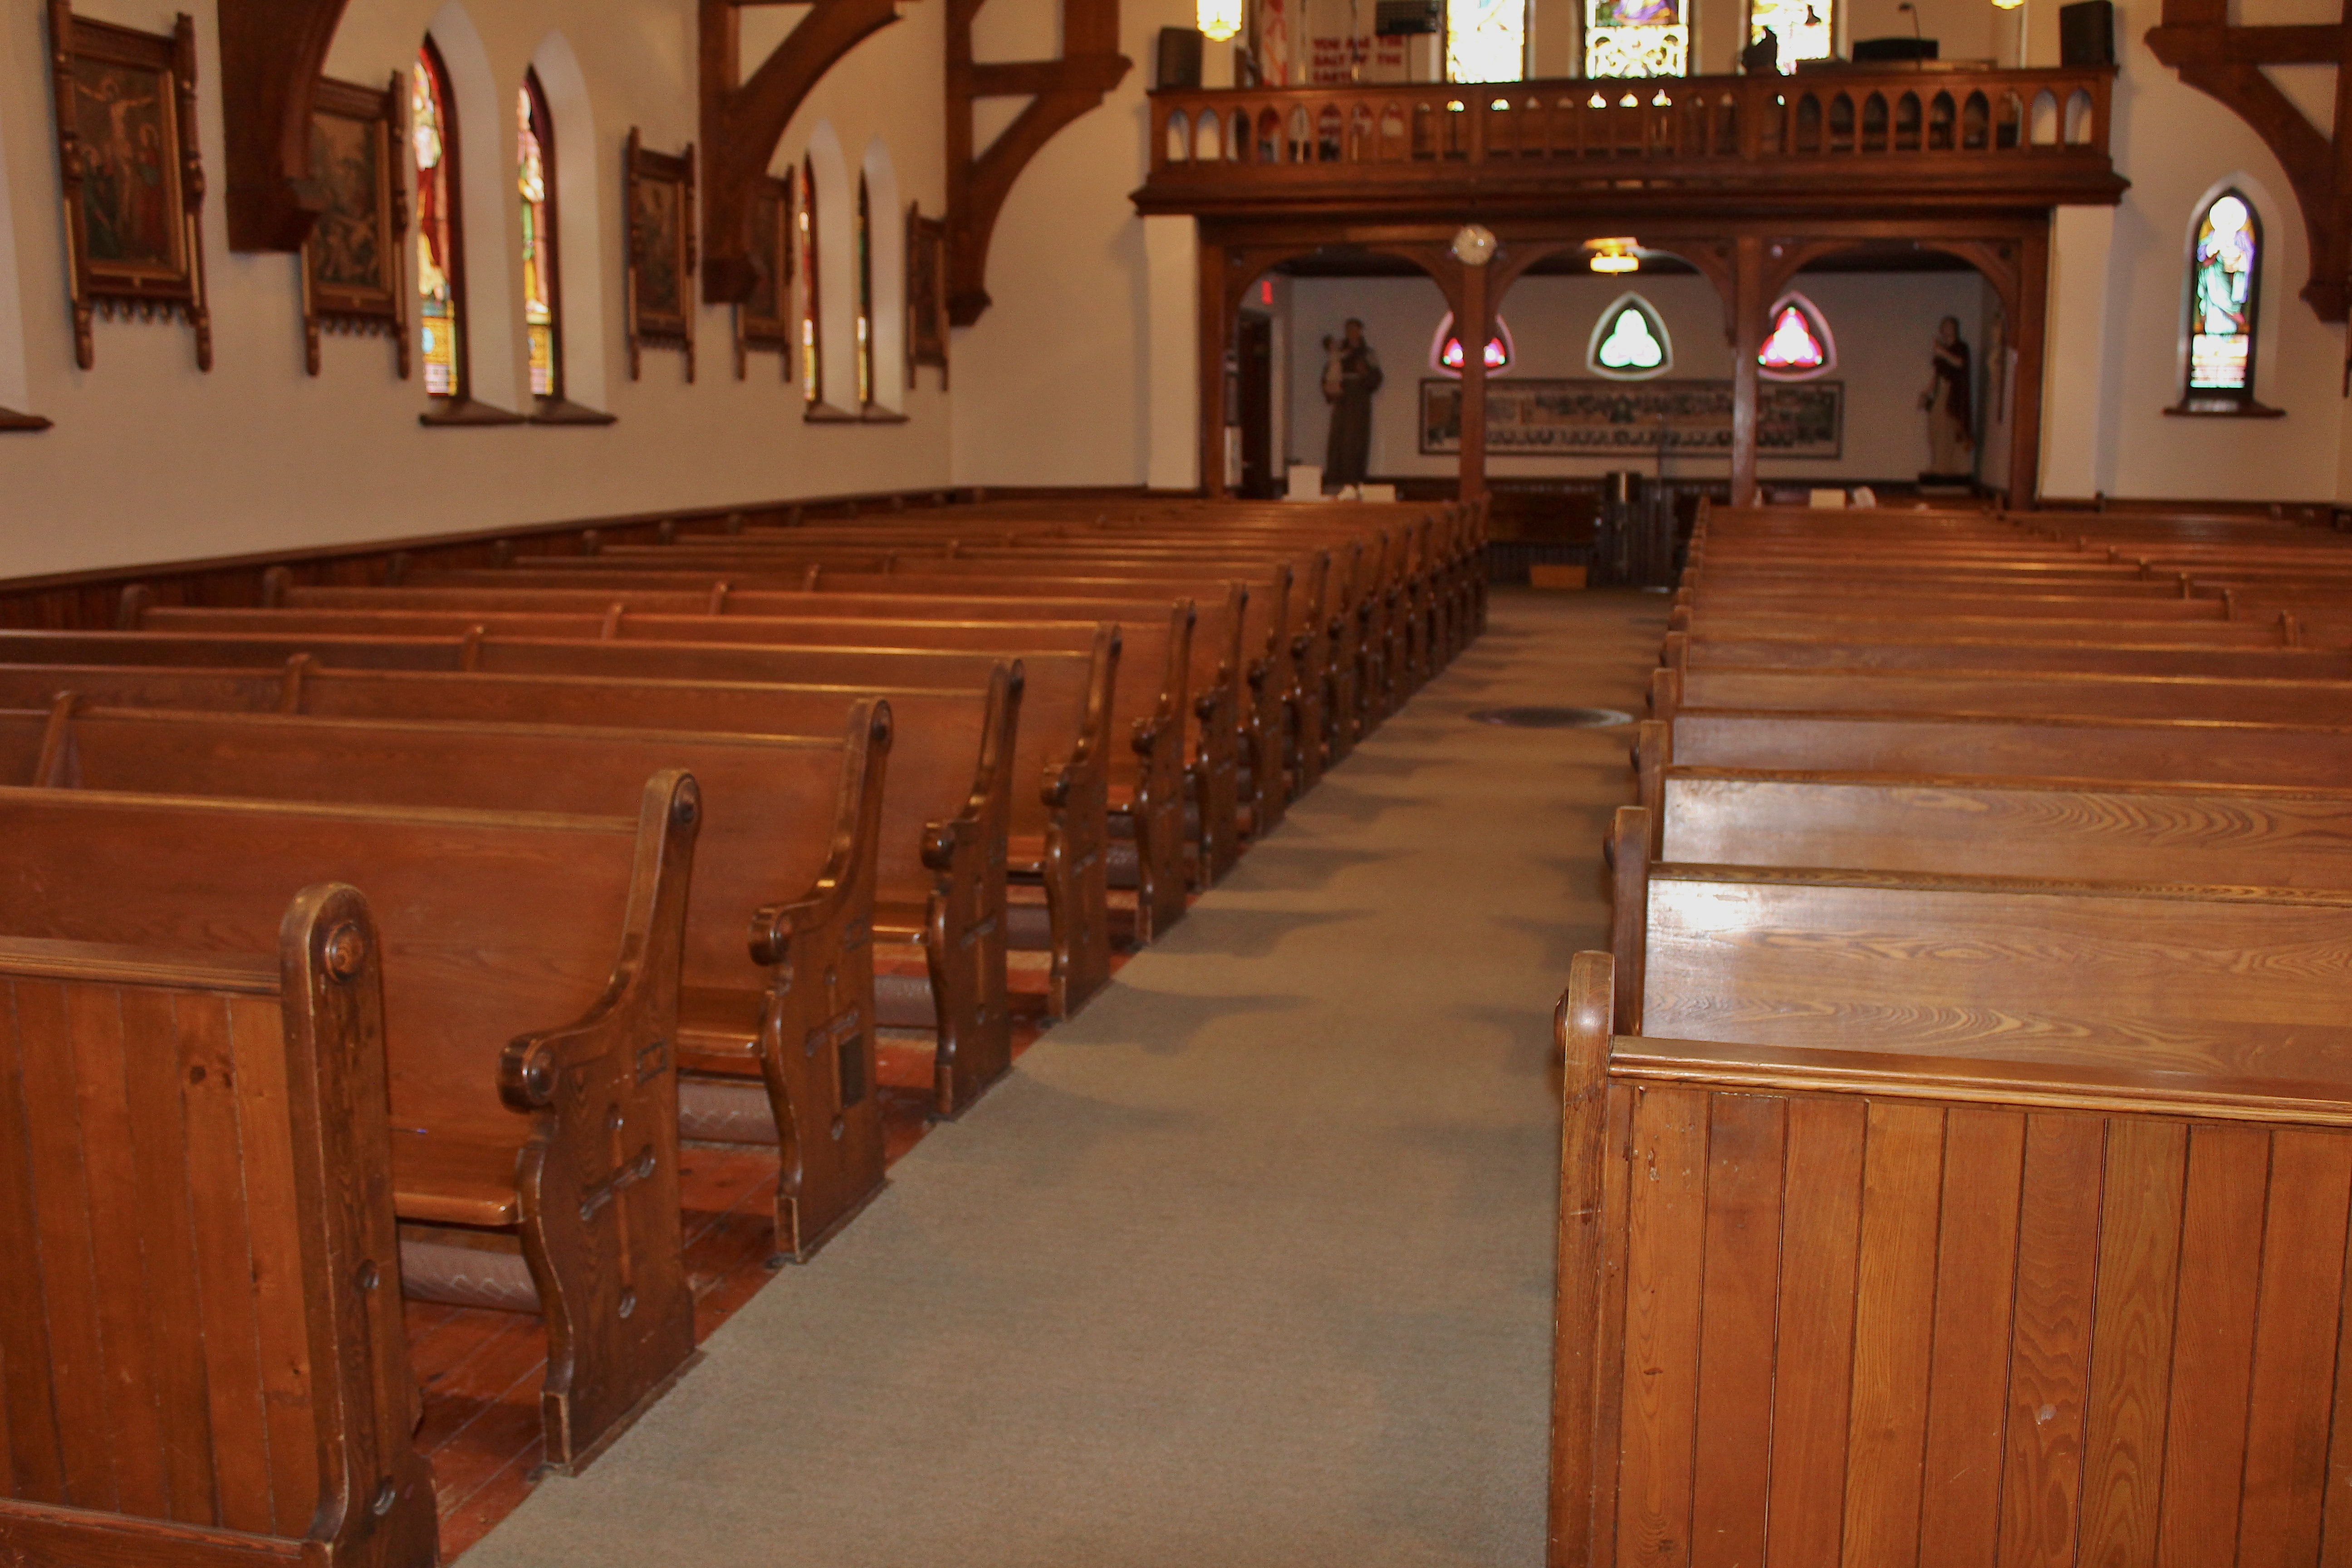 Wood church pews and windows in the left of a church